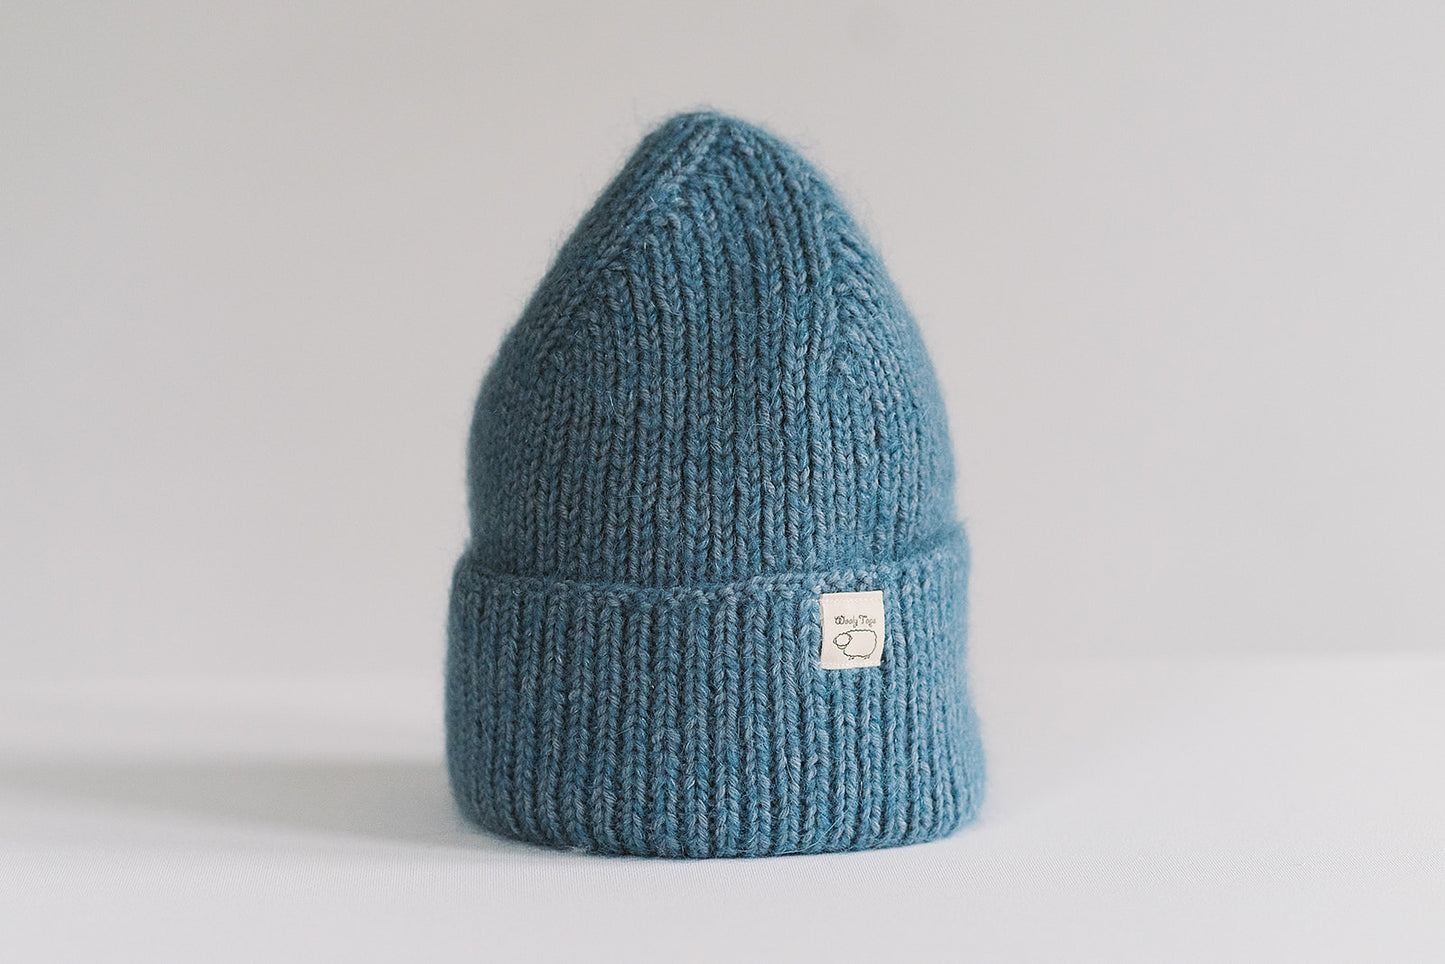 Hand-knitted Wooly Top hat in blue.